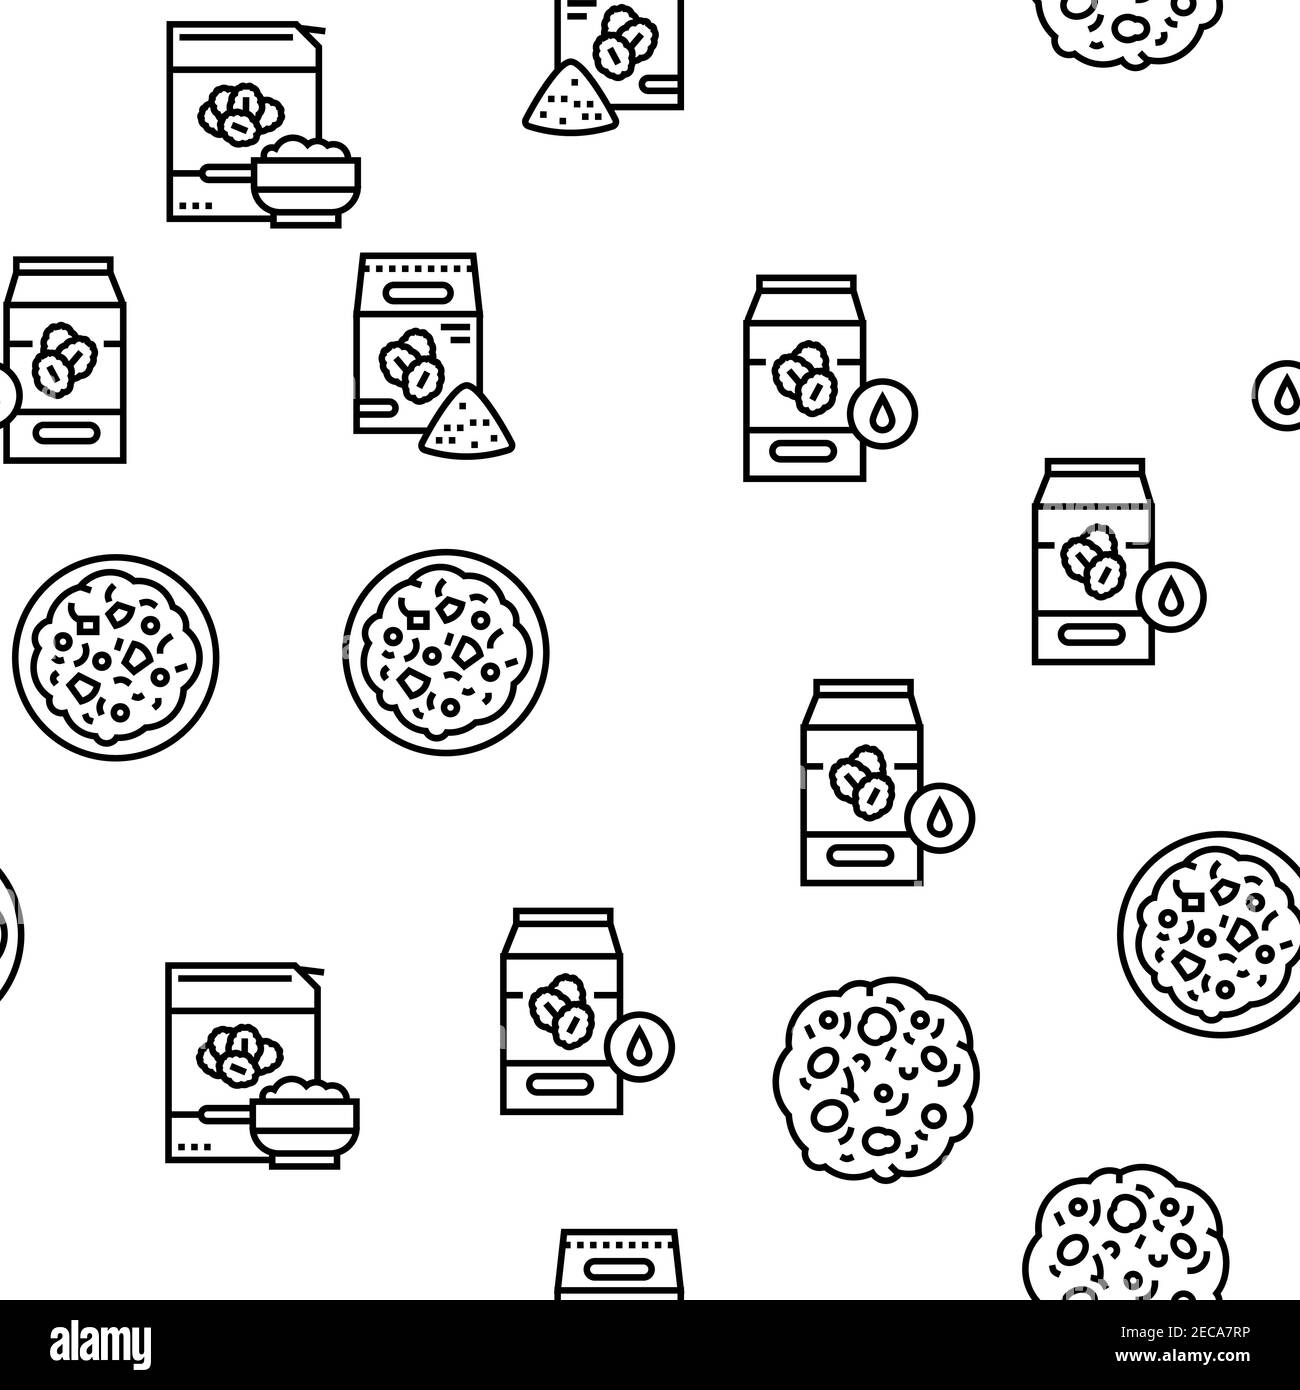 Oatmeal Nutrition Vector Seamless Pattern Stock Vector